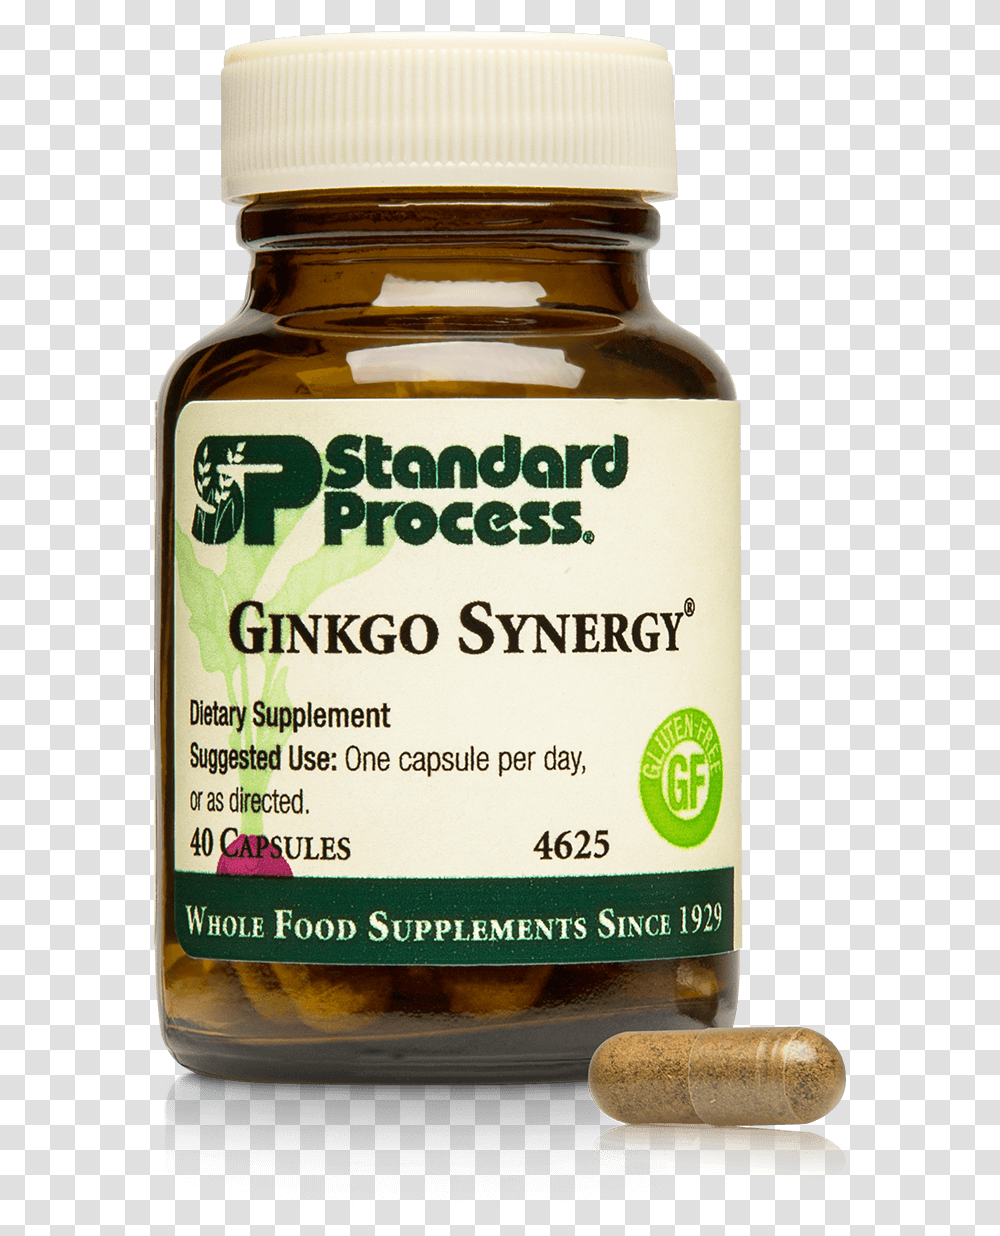 Ginkgo Synergy Bottle Capsule Ginkgo Supplement Standard Process, Aftershave, Cosmetics, Beer, Alcohol Transparent Png